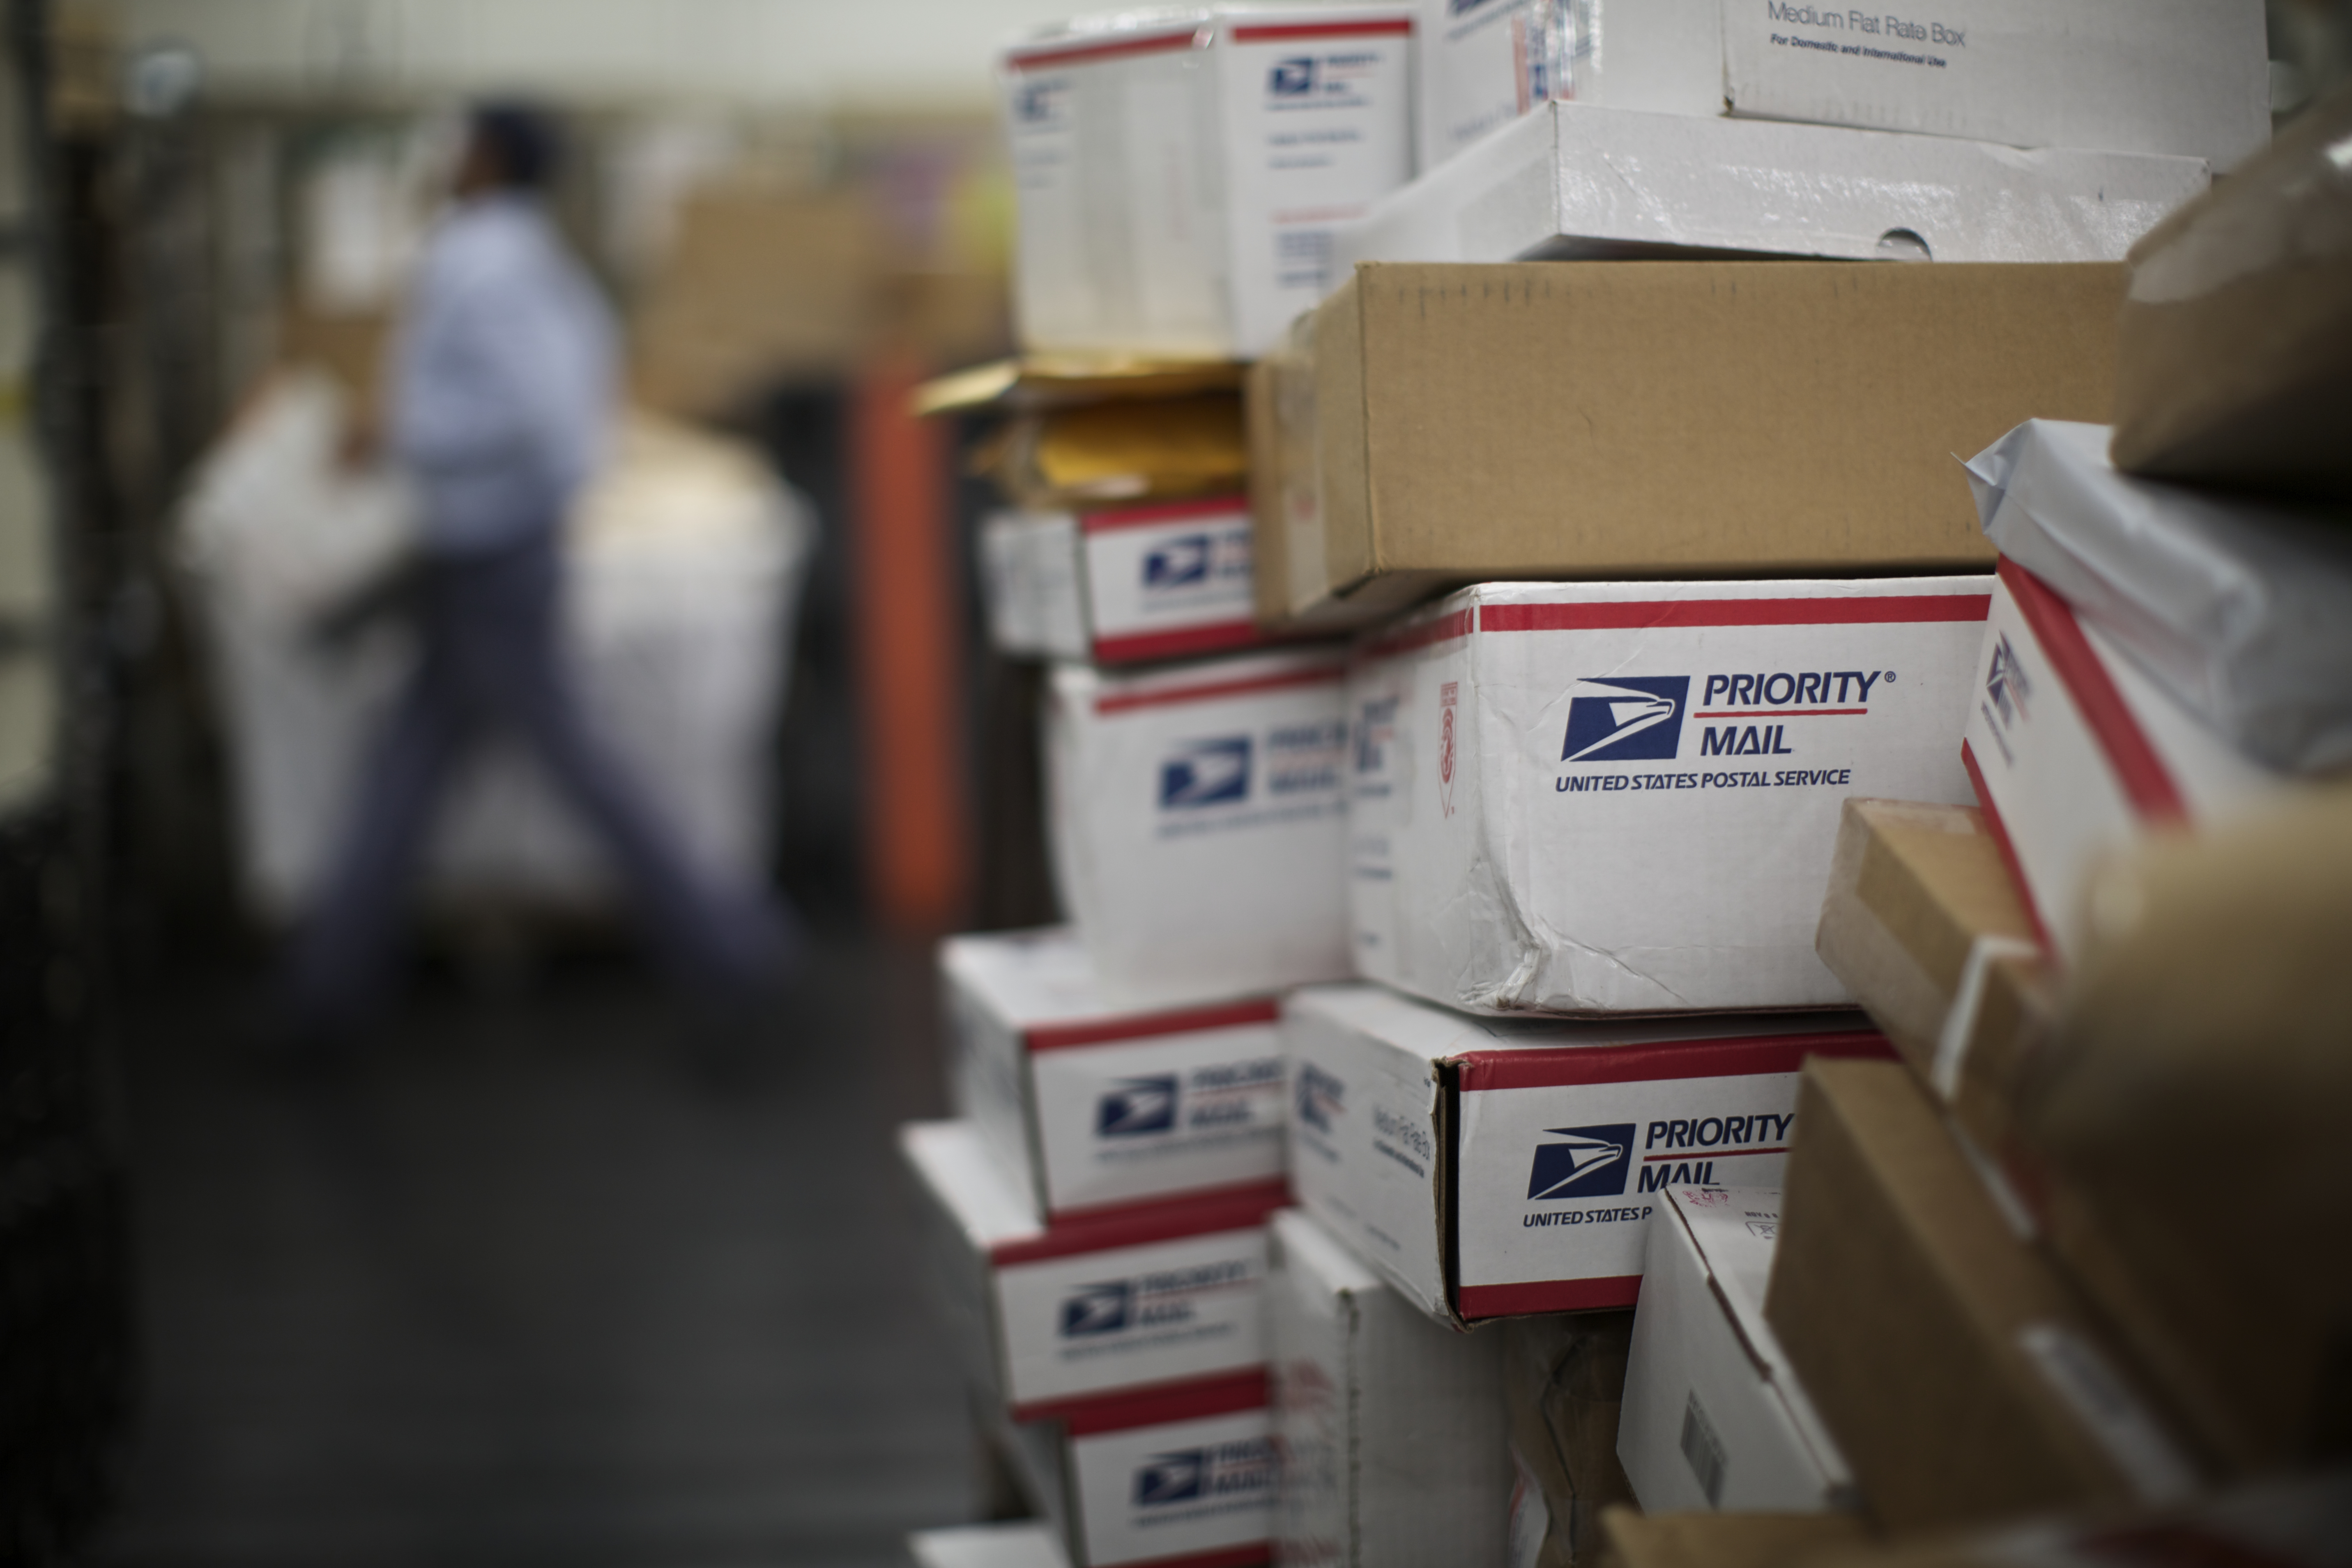 US Postman Held Onto 17,000+ Mail Items, Promises He Sent The ‘Important’ Ones